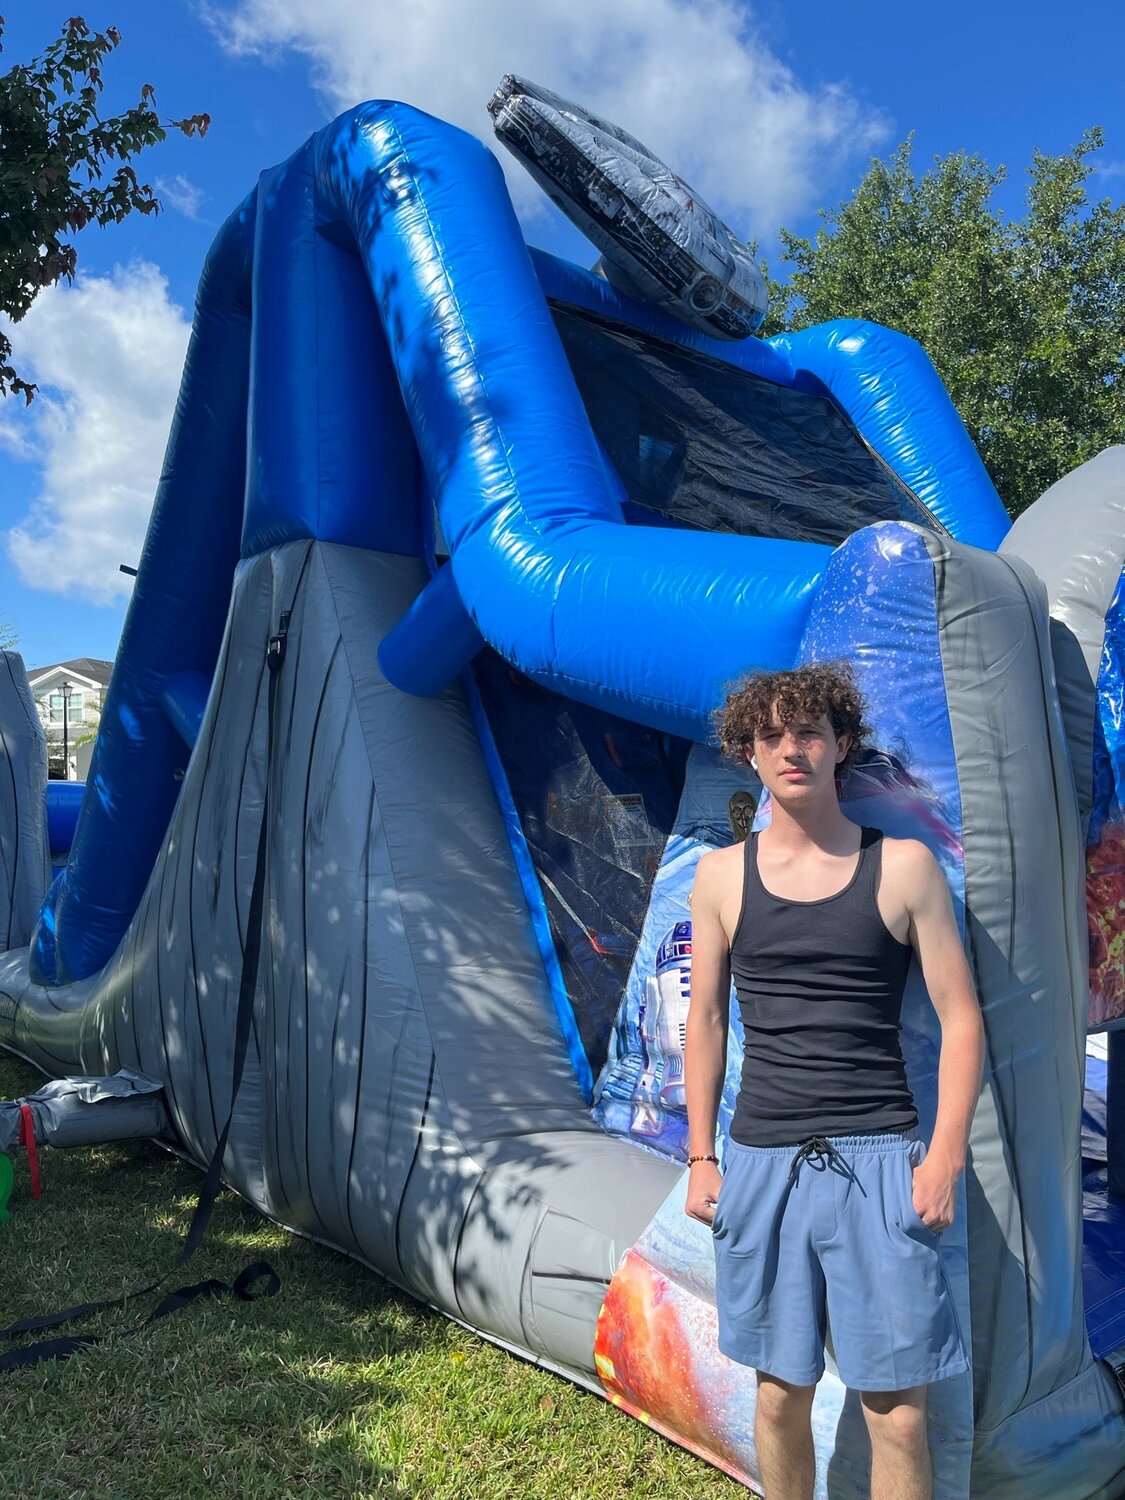 Rogan Drainer stands next to “Star Wars” themed obstacle course, one of the “bounce houses” rented by Stars N Stripes Inflatables.